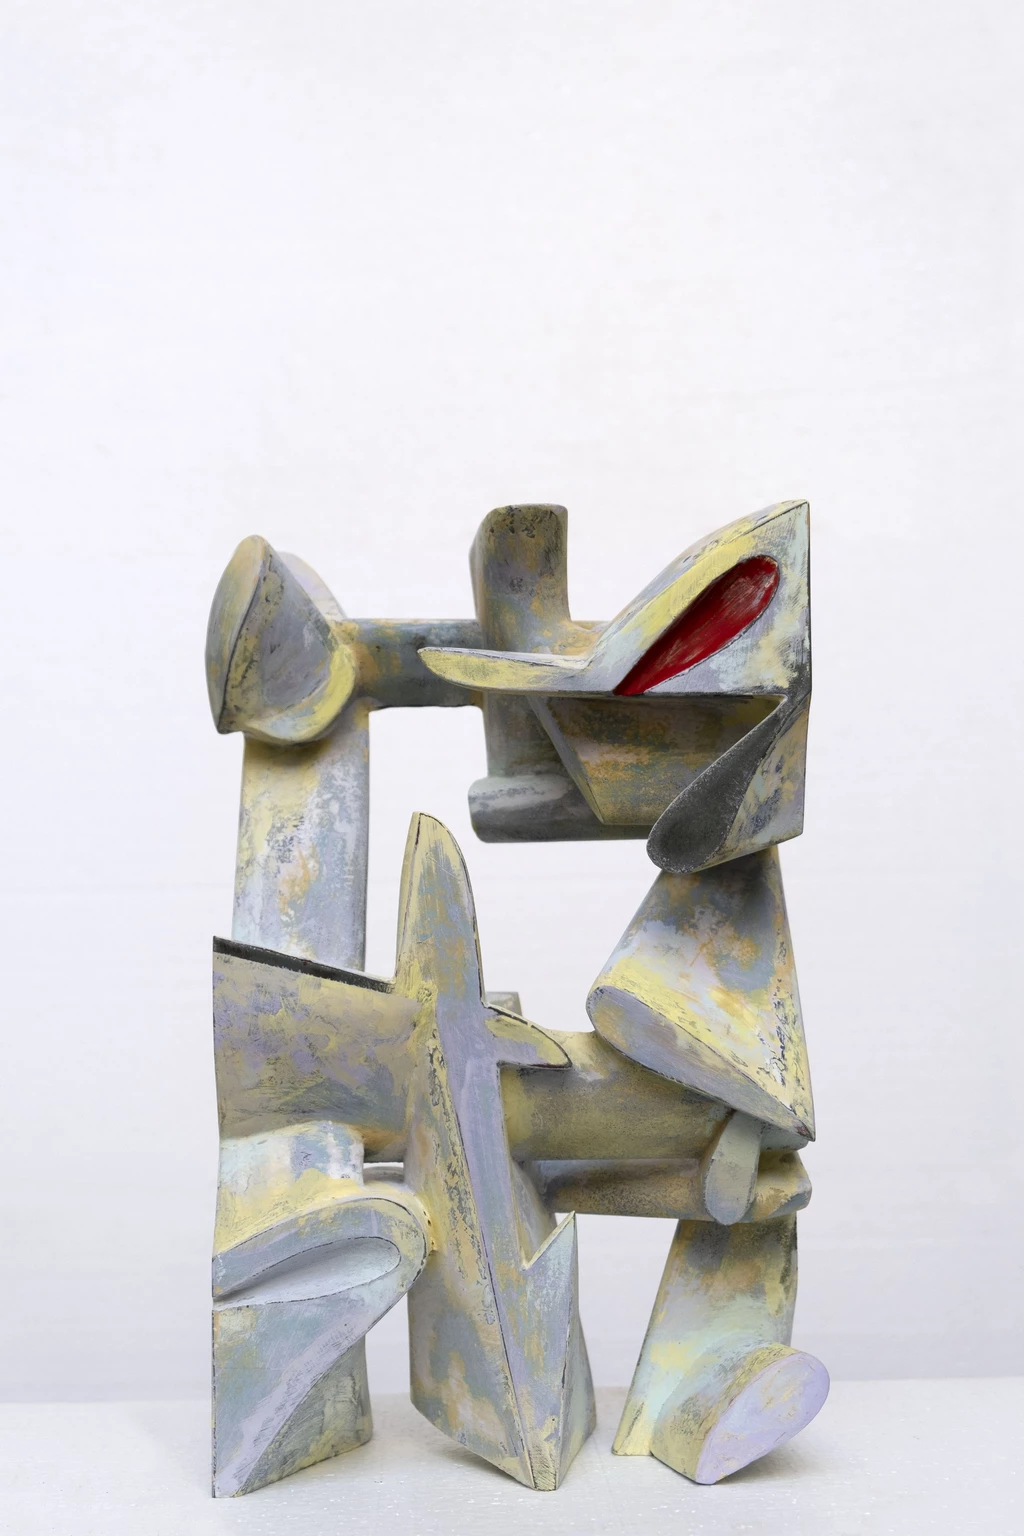 Longing 2., 2022 - colored and painted concrete, 39,5 x 25 x 12,5 cm